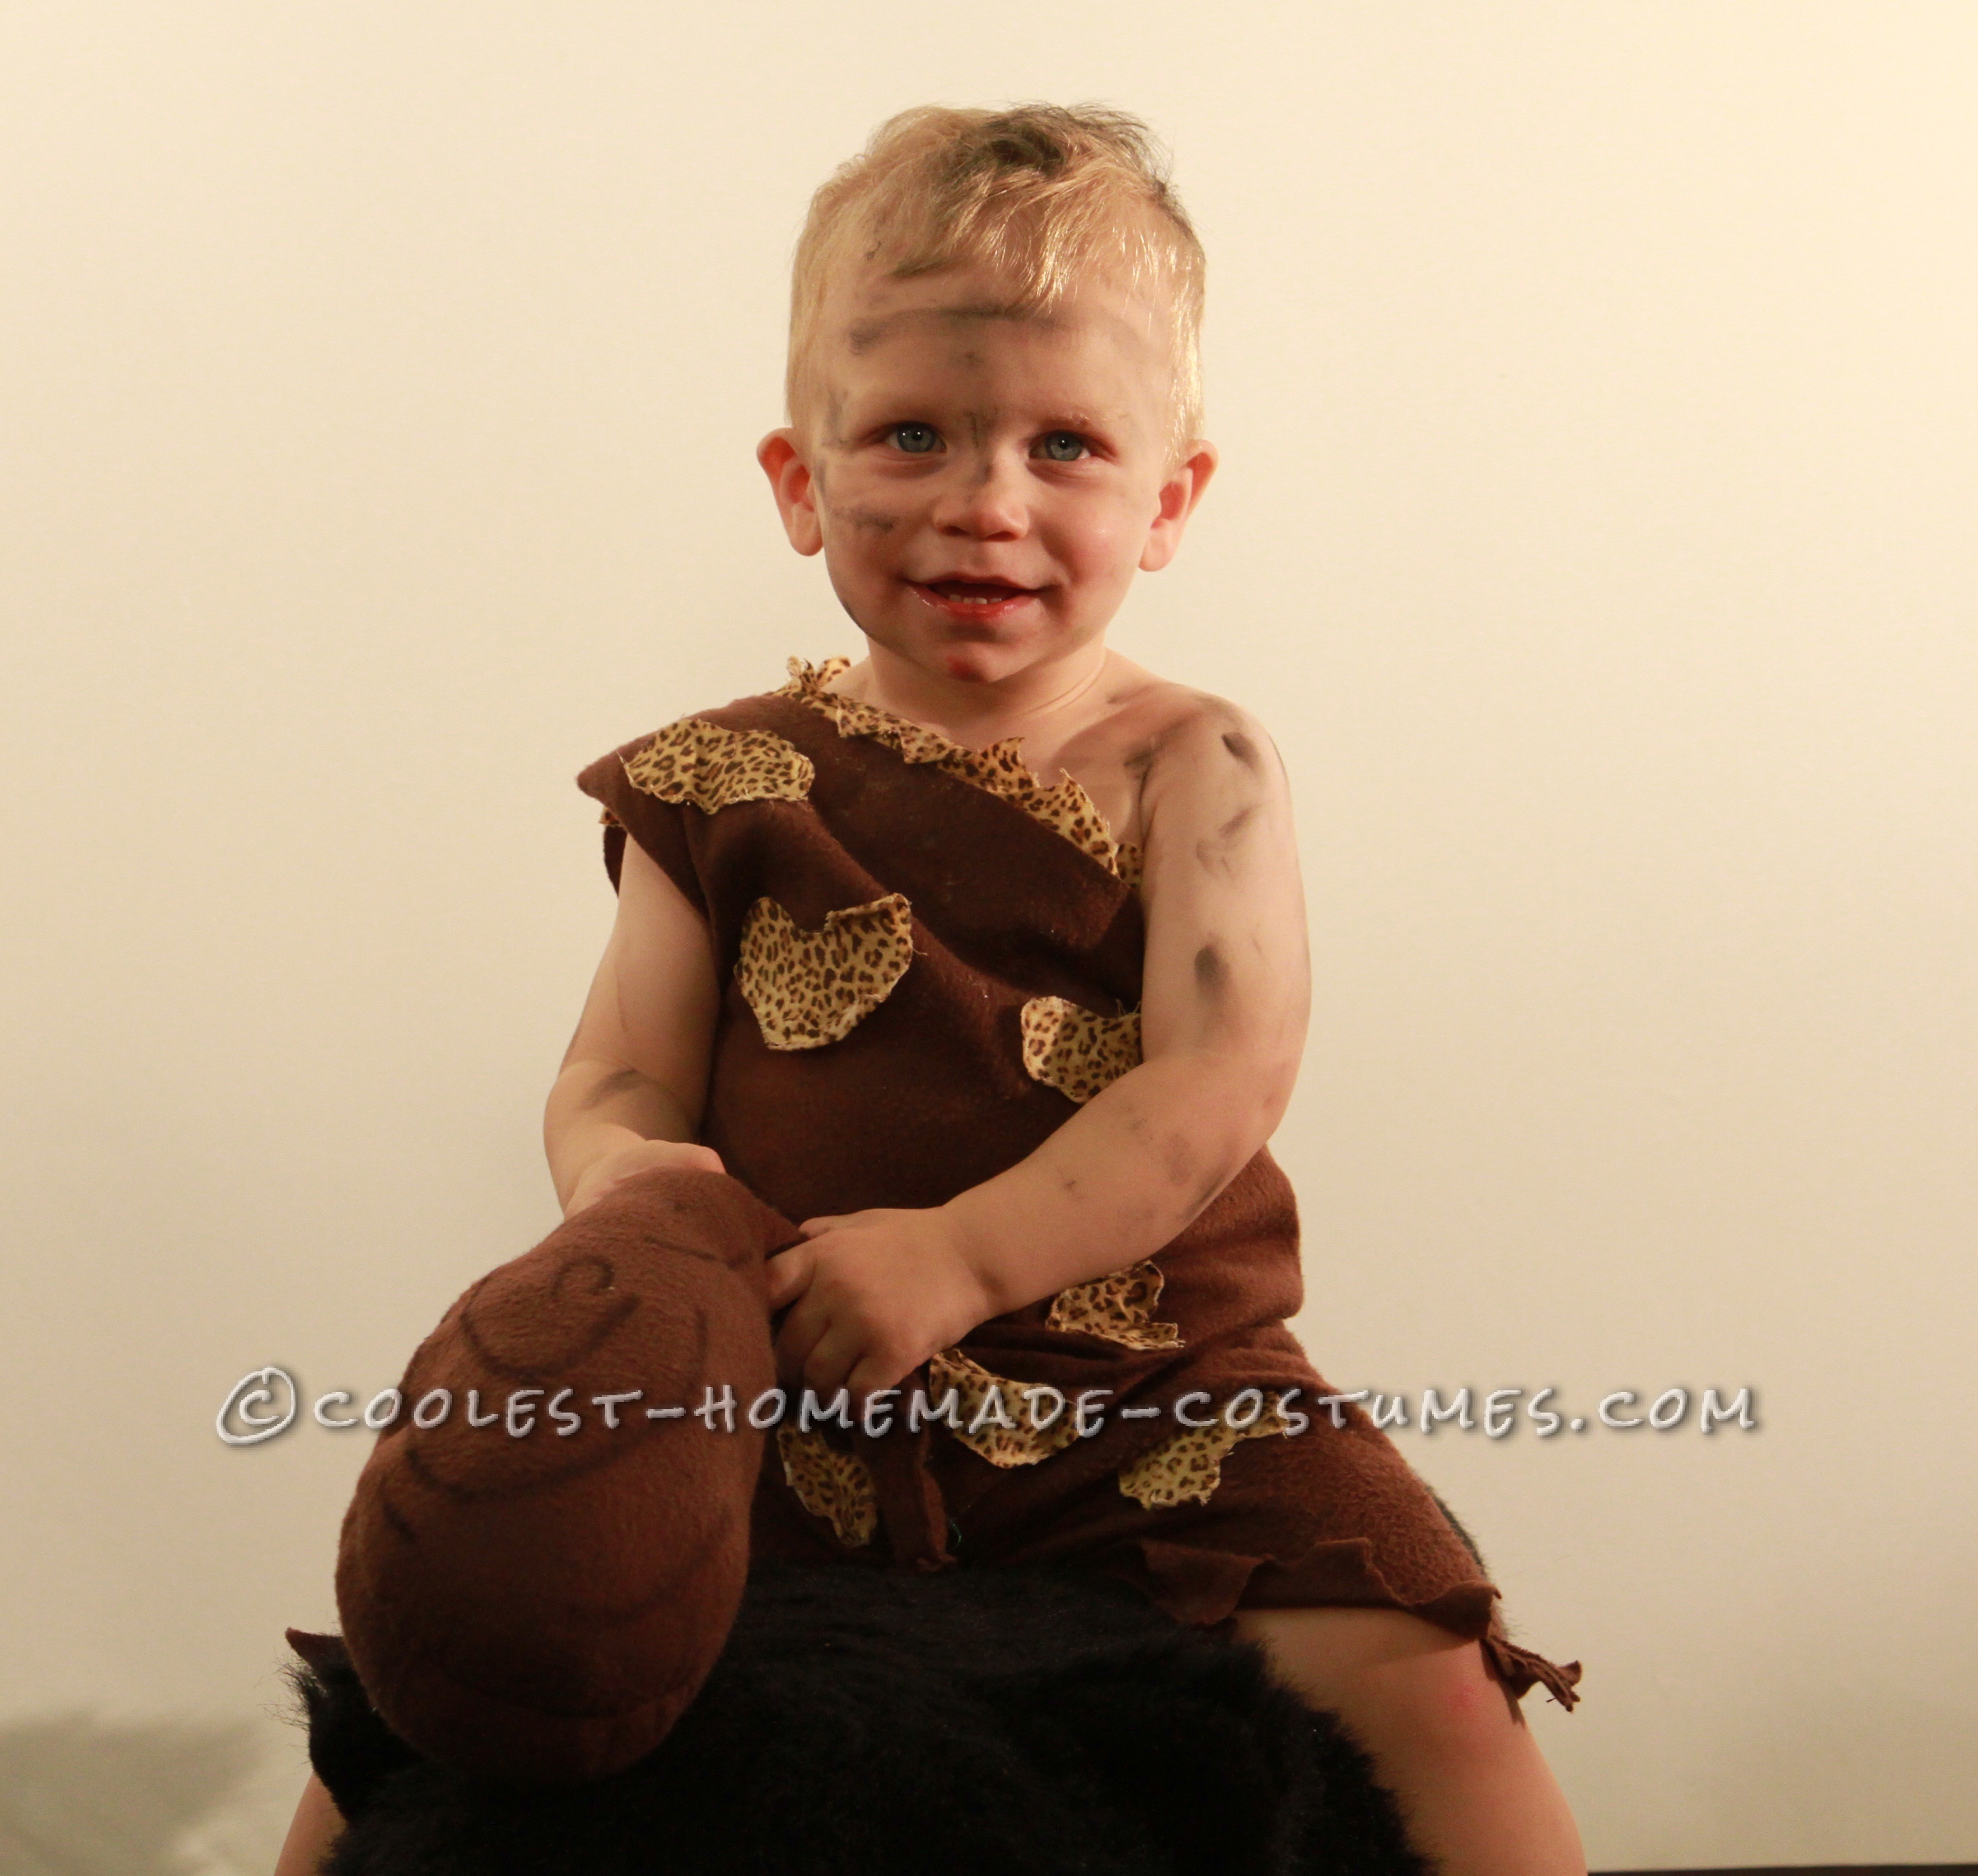 Coolest Homemade Cave Man Costume for a Toddler